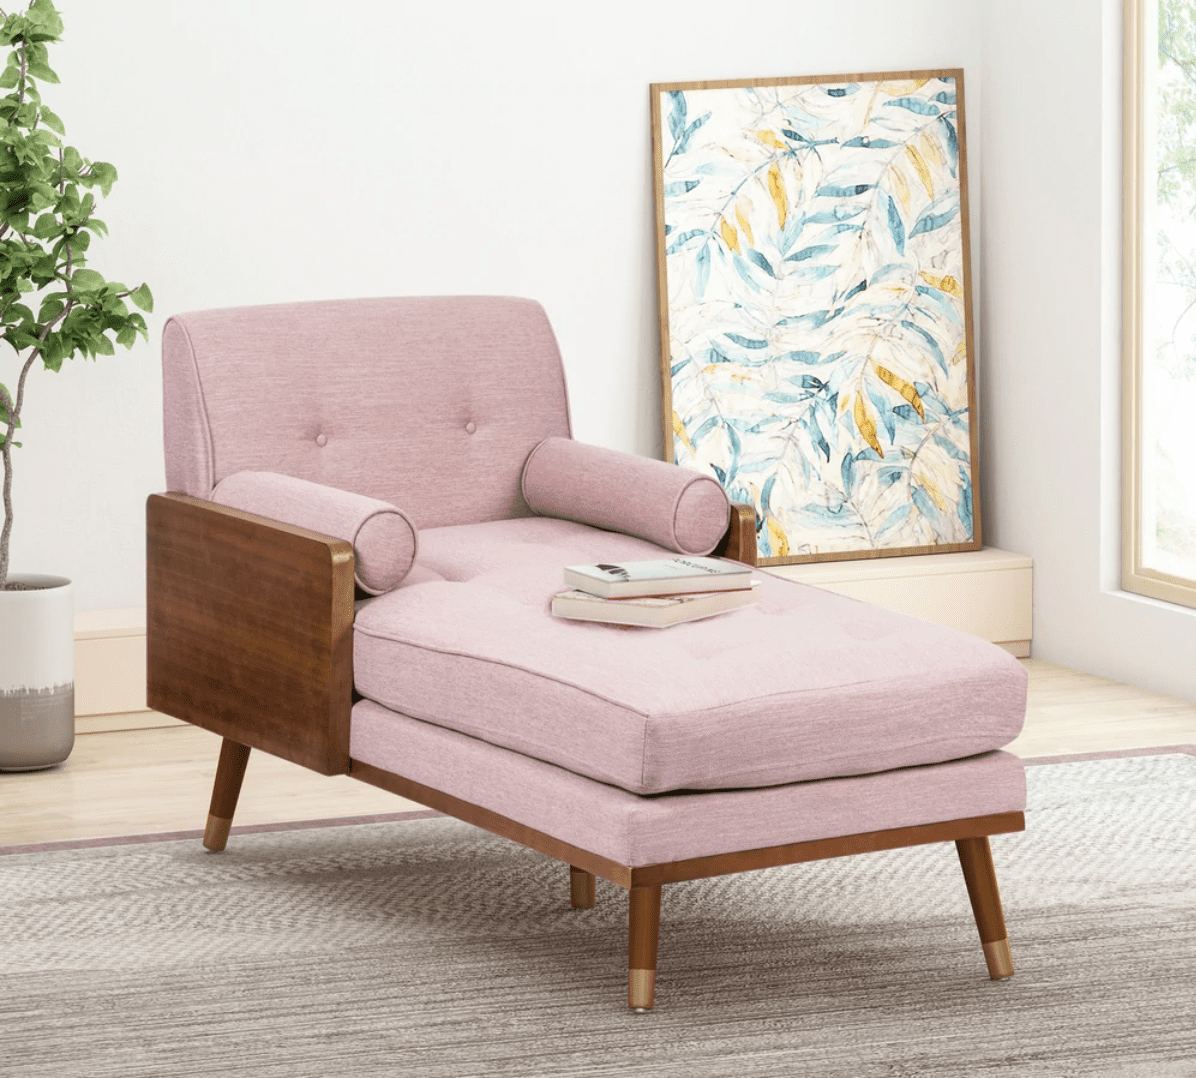 9 Modern Chaise Lounges For 2020 Best Chaises For Stylish Rooms Apartment Therapy